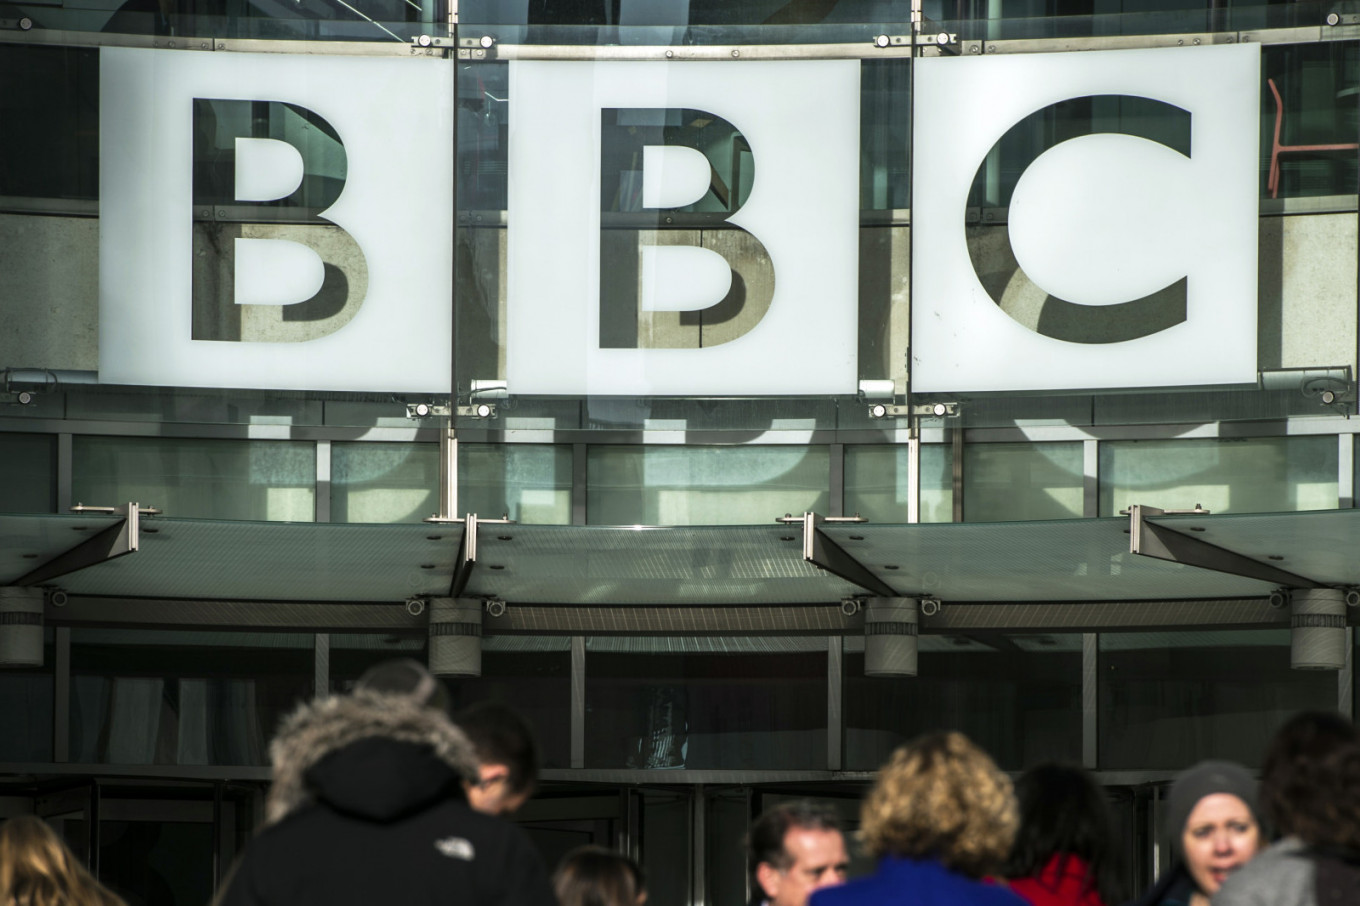 Russia Accuses BBC World News of Violating Broadcasting Requirements